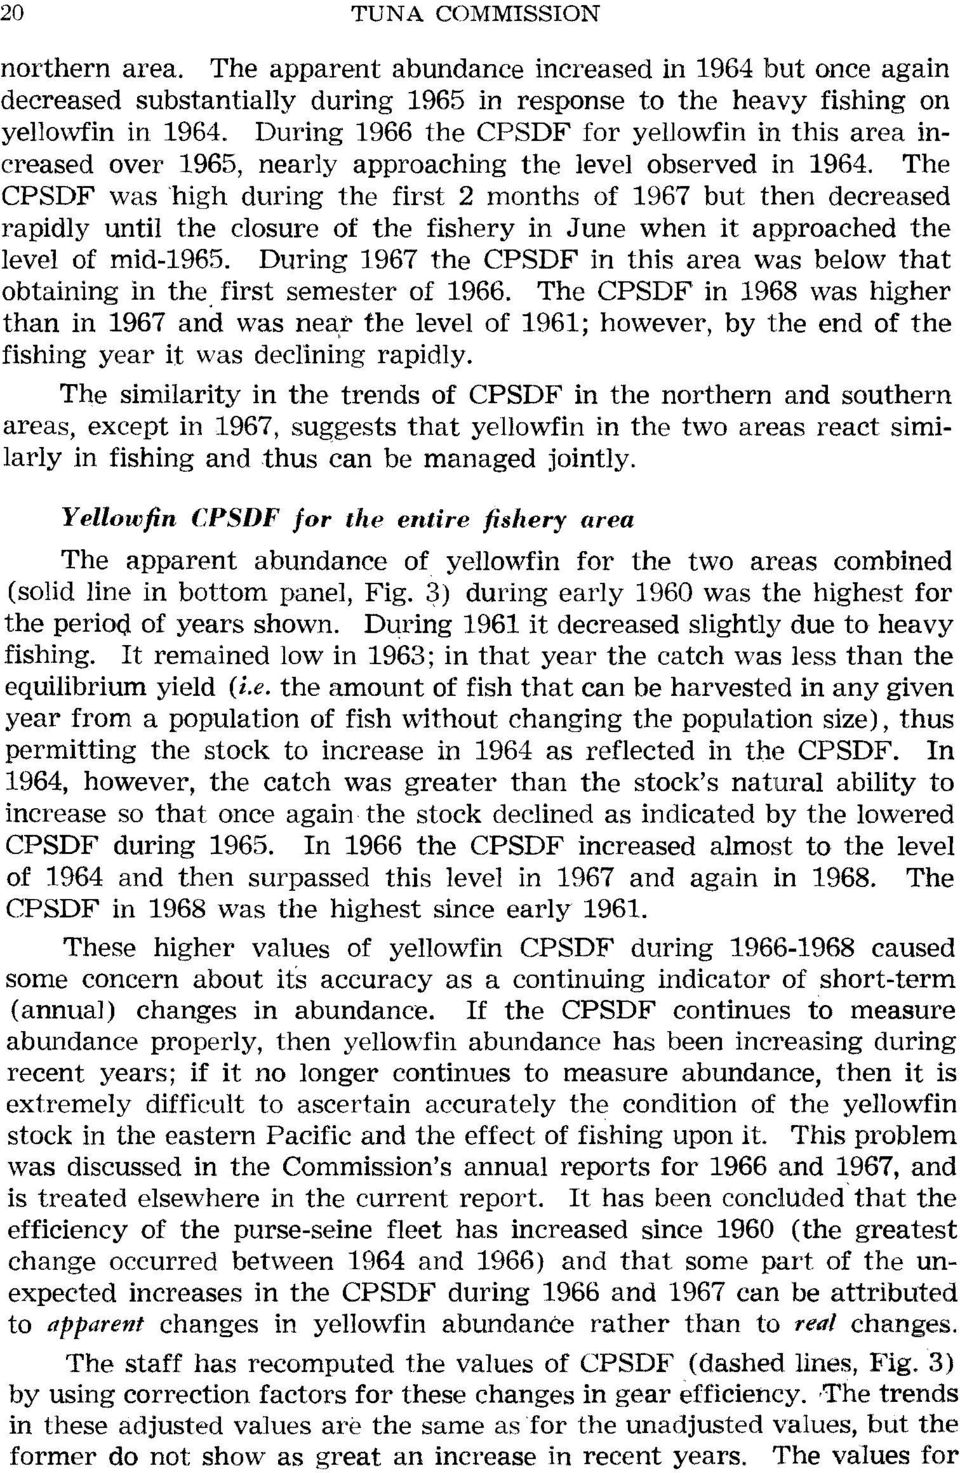 The CPSDF was "high during the first 2 months of 1967 but then decreased rapidly until the closure of the fishery in June when it approached the level of mid-1965.